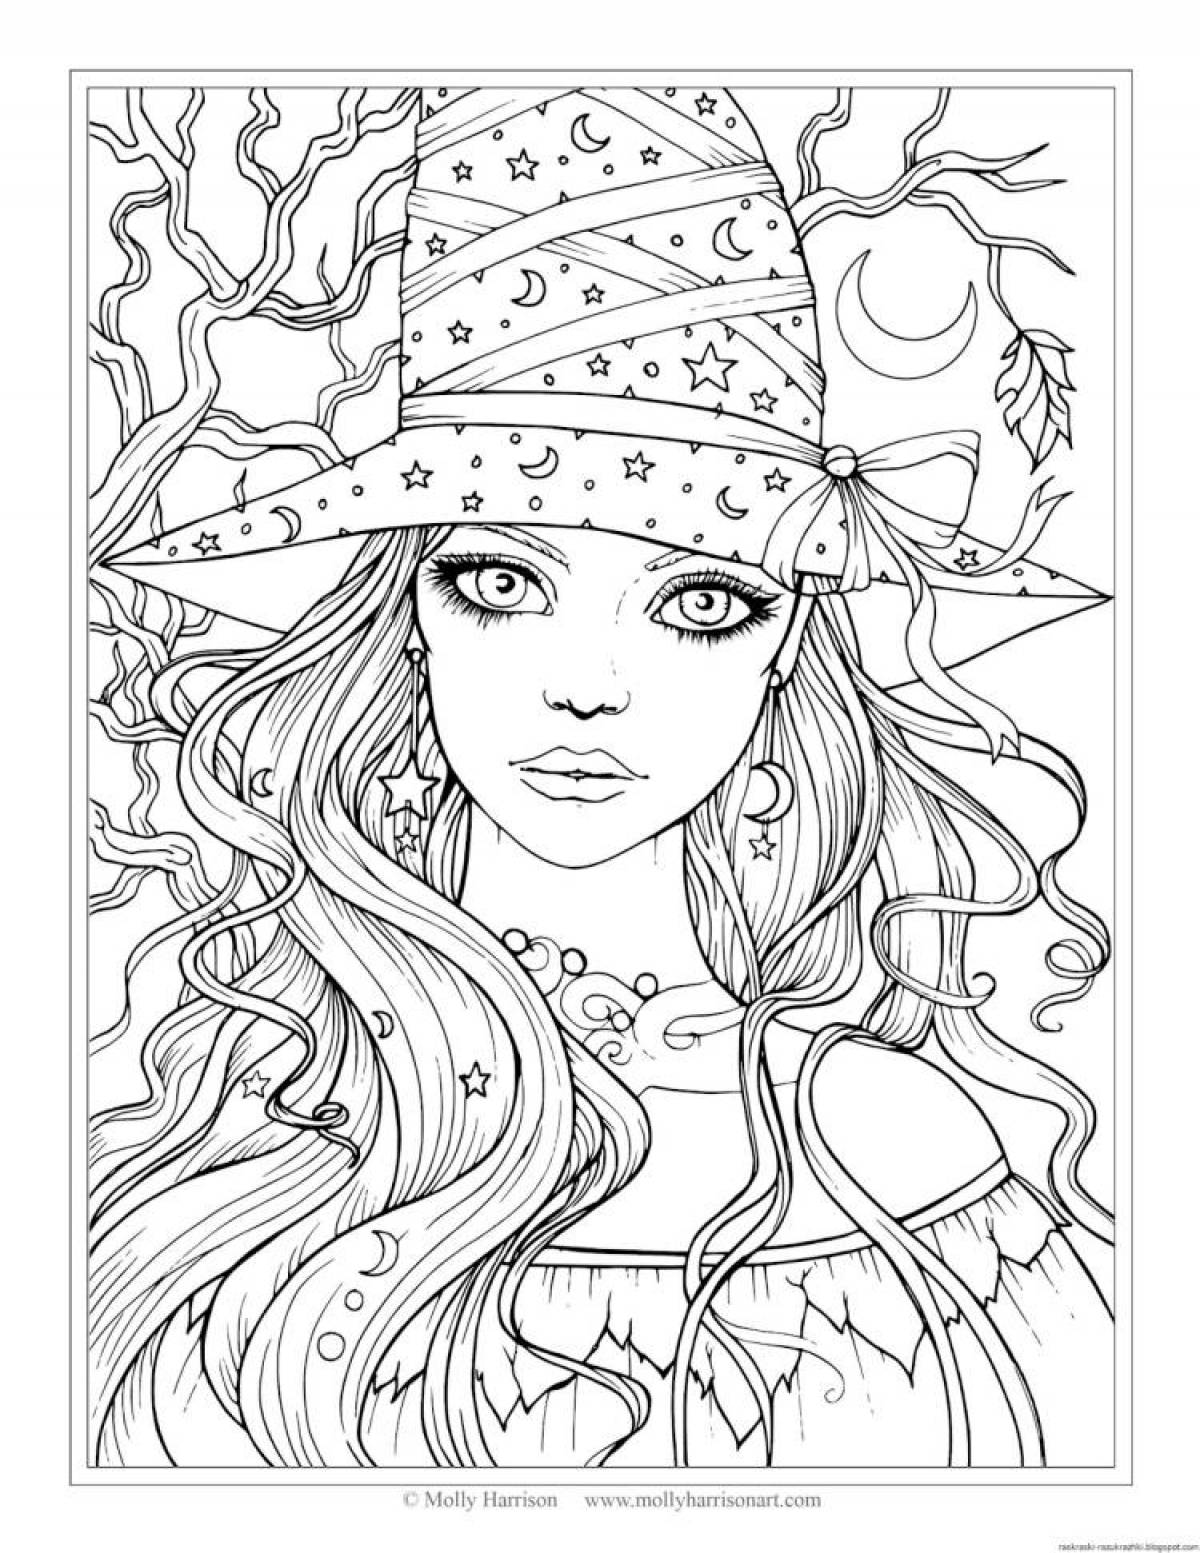 Mystical coloring book for girls 12 years old